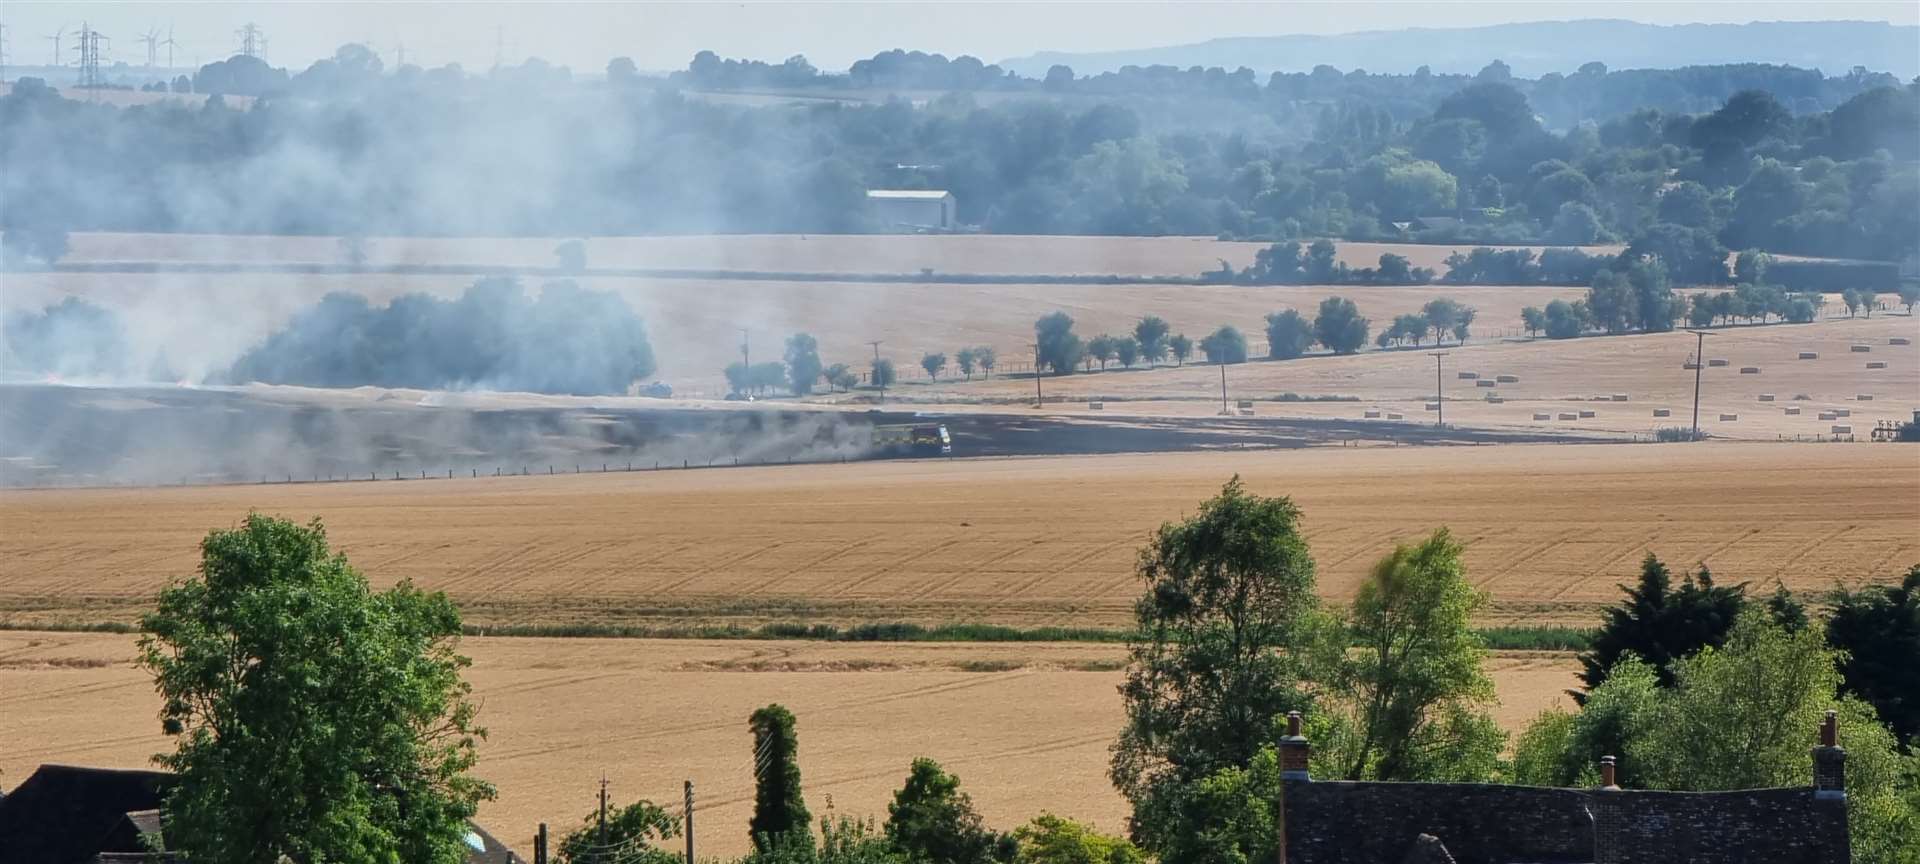 Michael Fry could see the blaze as he went to check on his horses in a nearby field